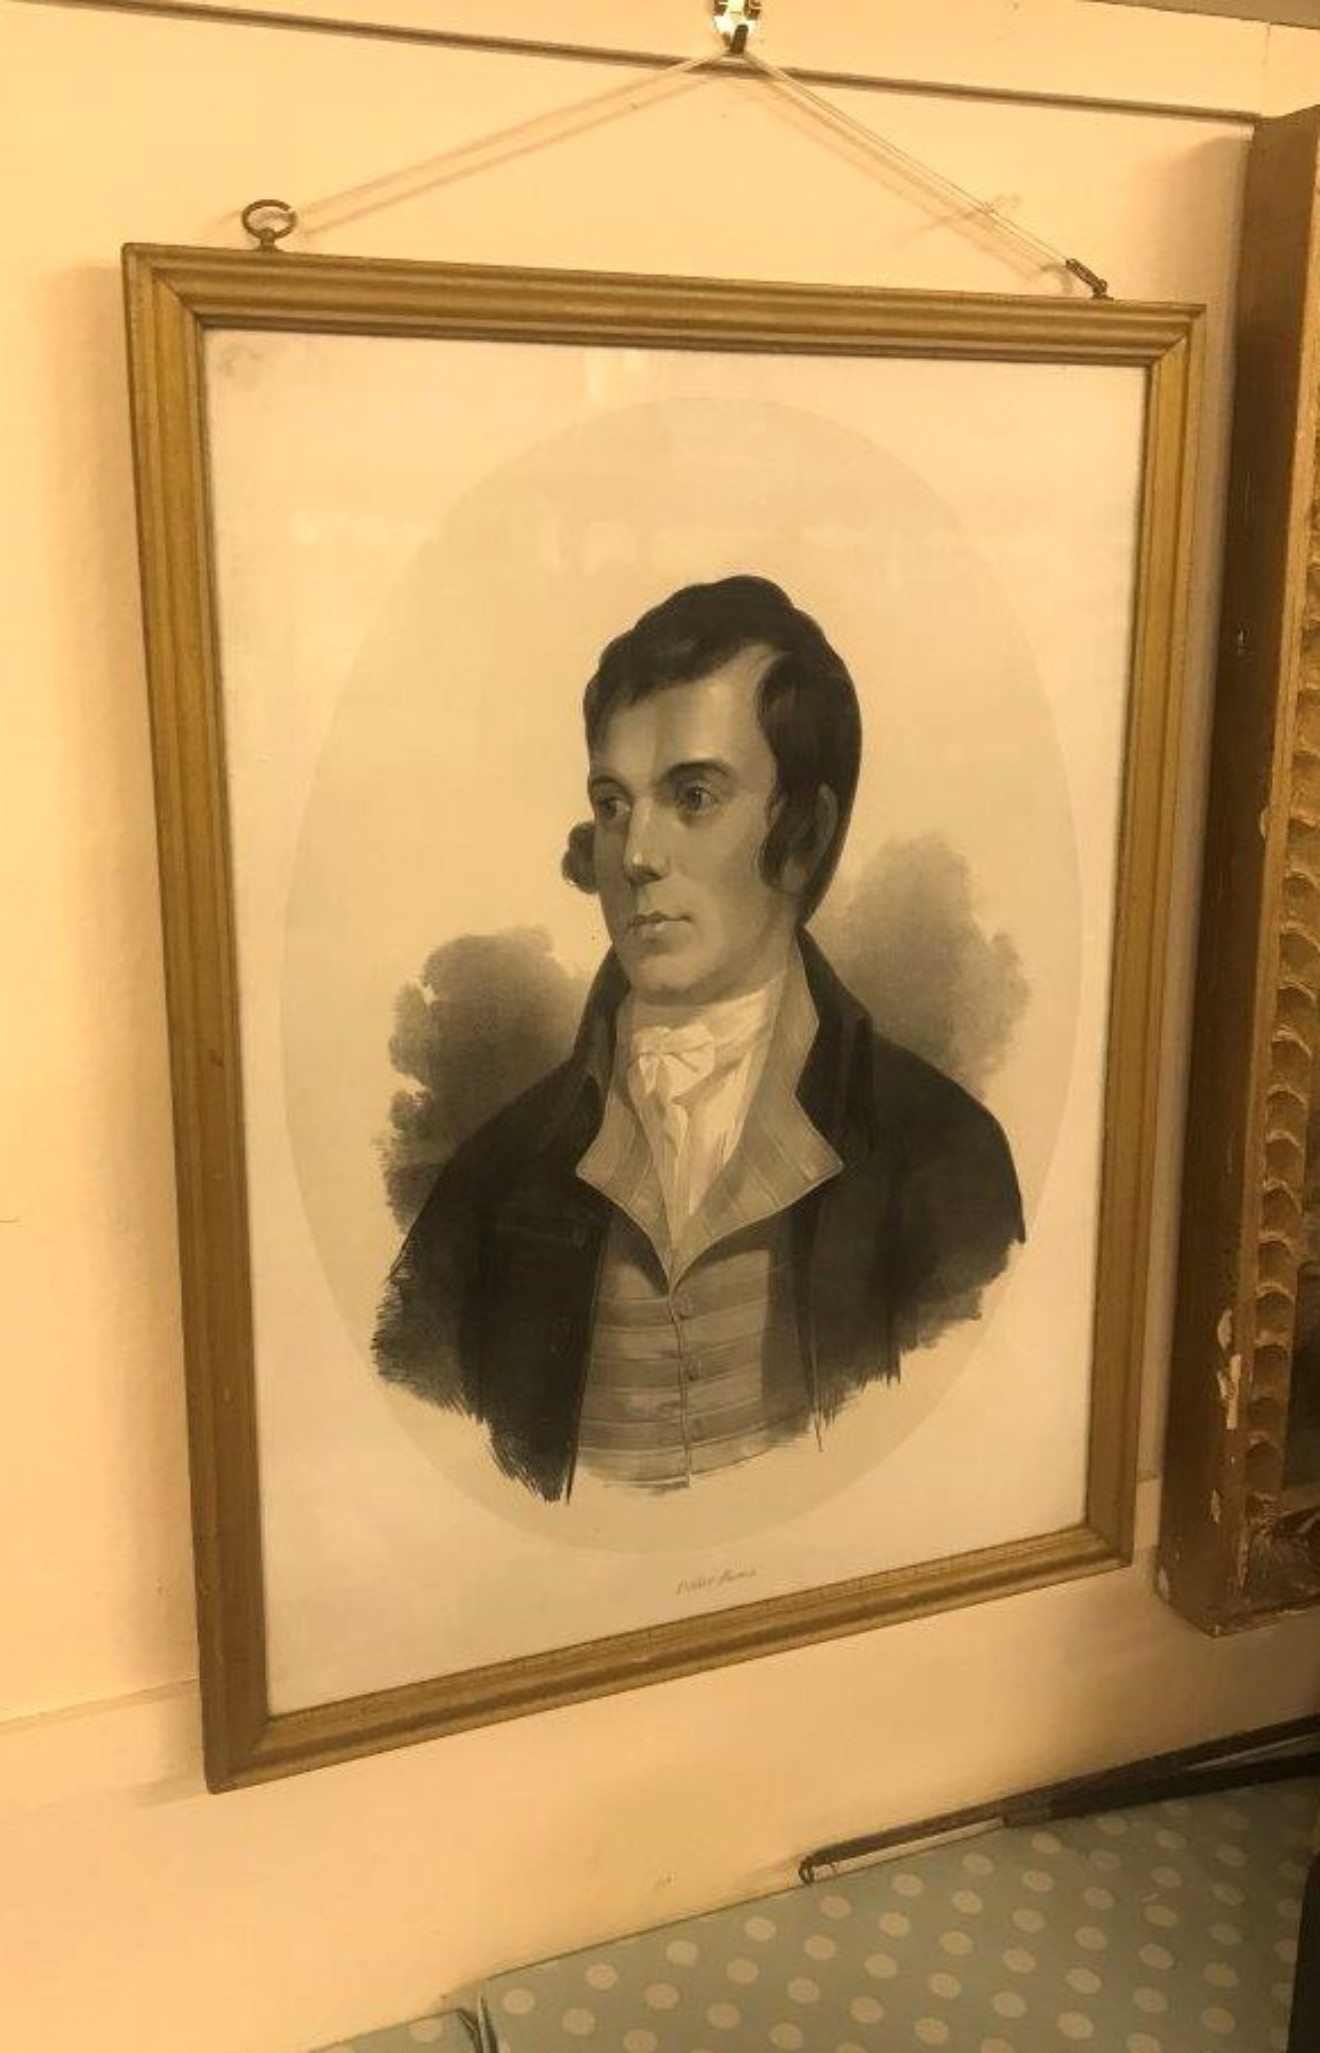 Victorian Lithograph Print of "Robert Burns" Drawn by J H Lynch after the Portrait by Alexander Nasmyth